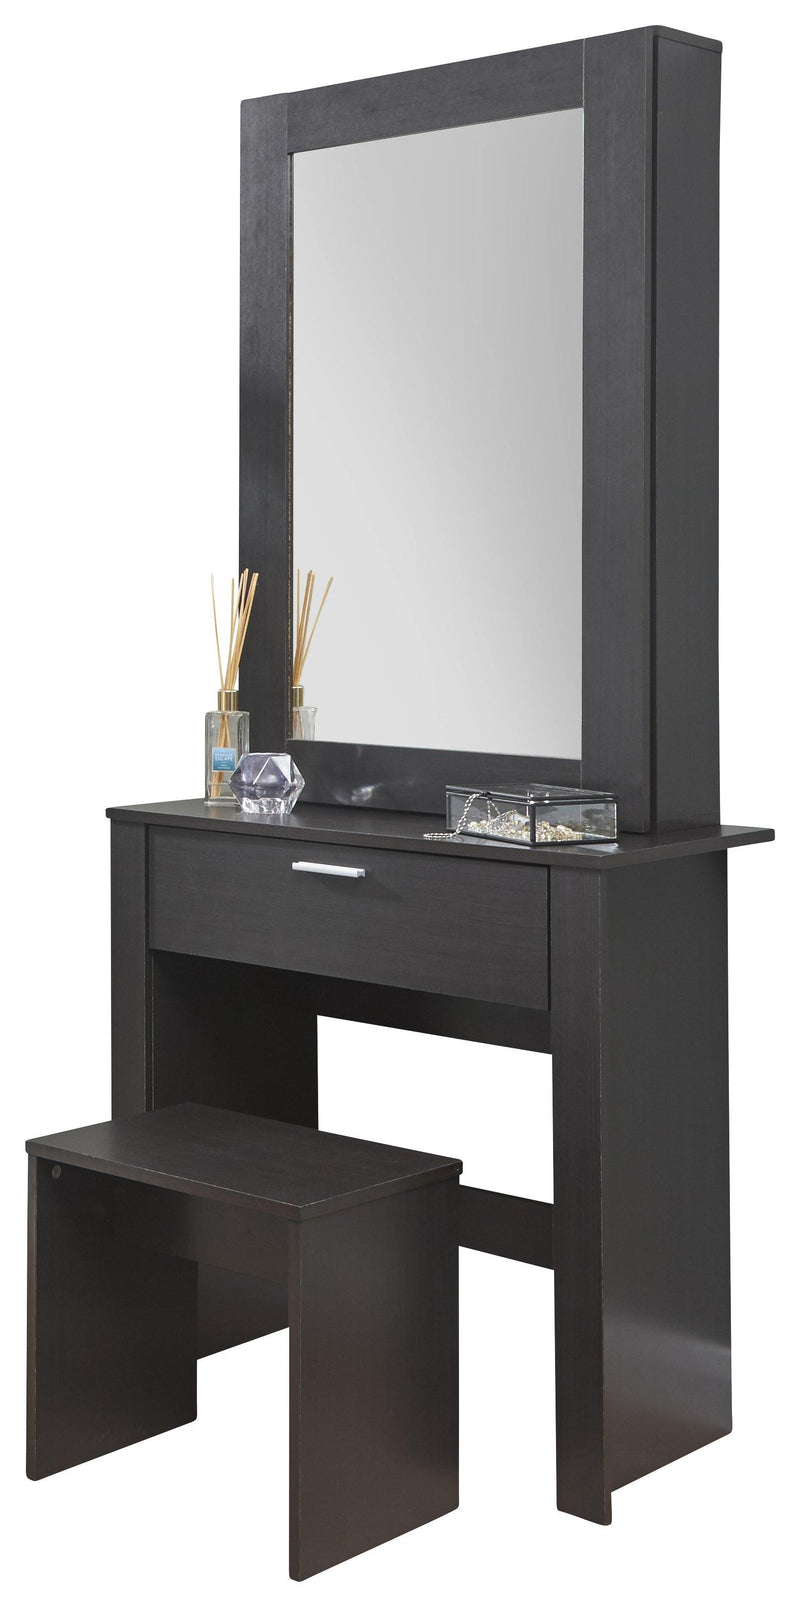 Hobson Mirrored Unit & Stool - Bankrupt Beds